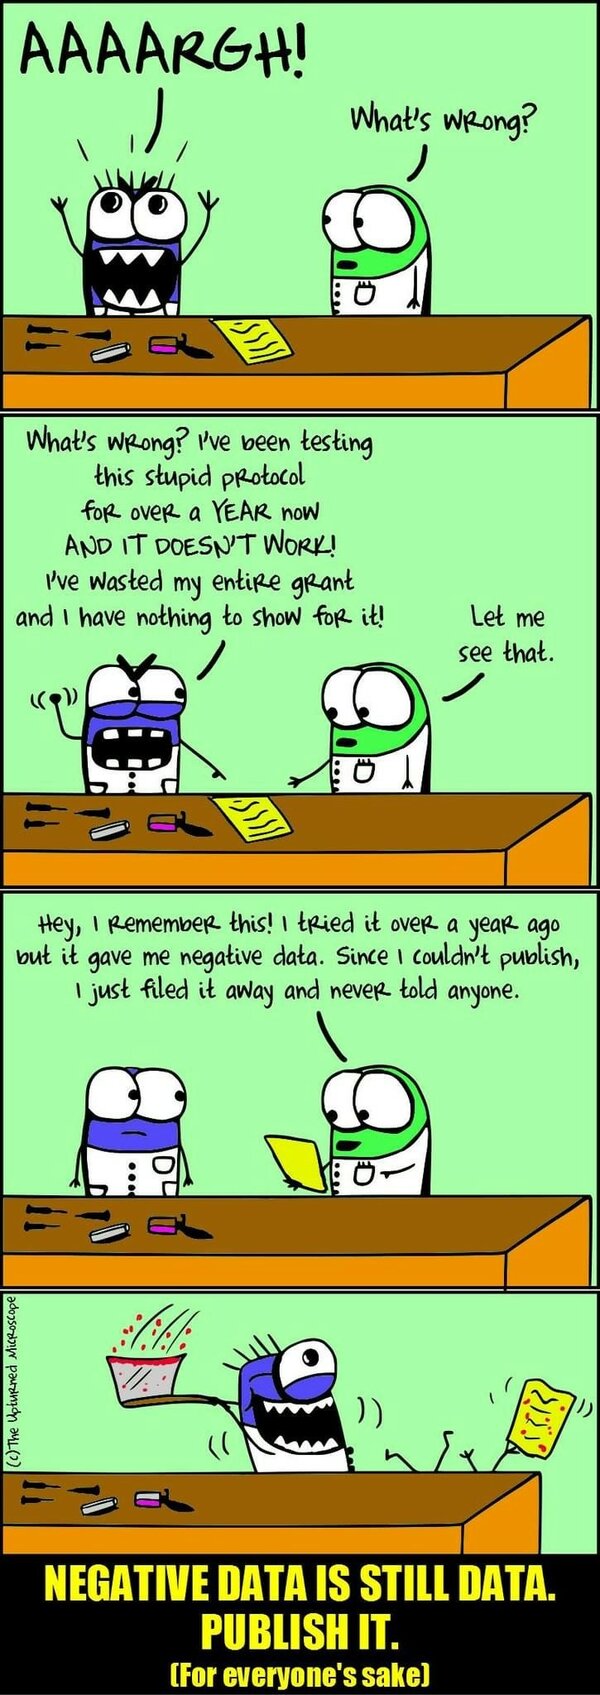 For Abinzano, this comic perfectly represents her belief that sharing failed research is essential. Image: The Upturned Microscope